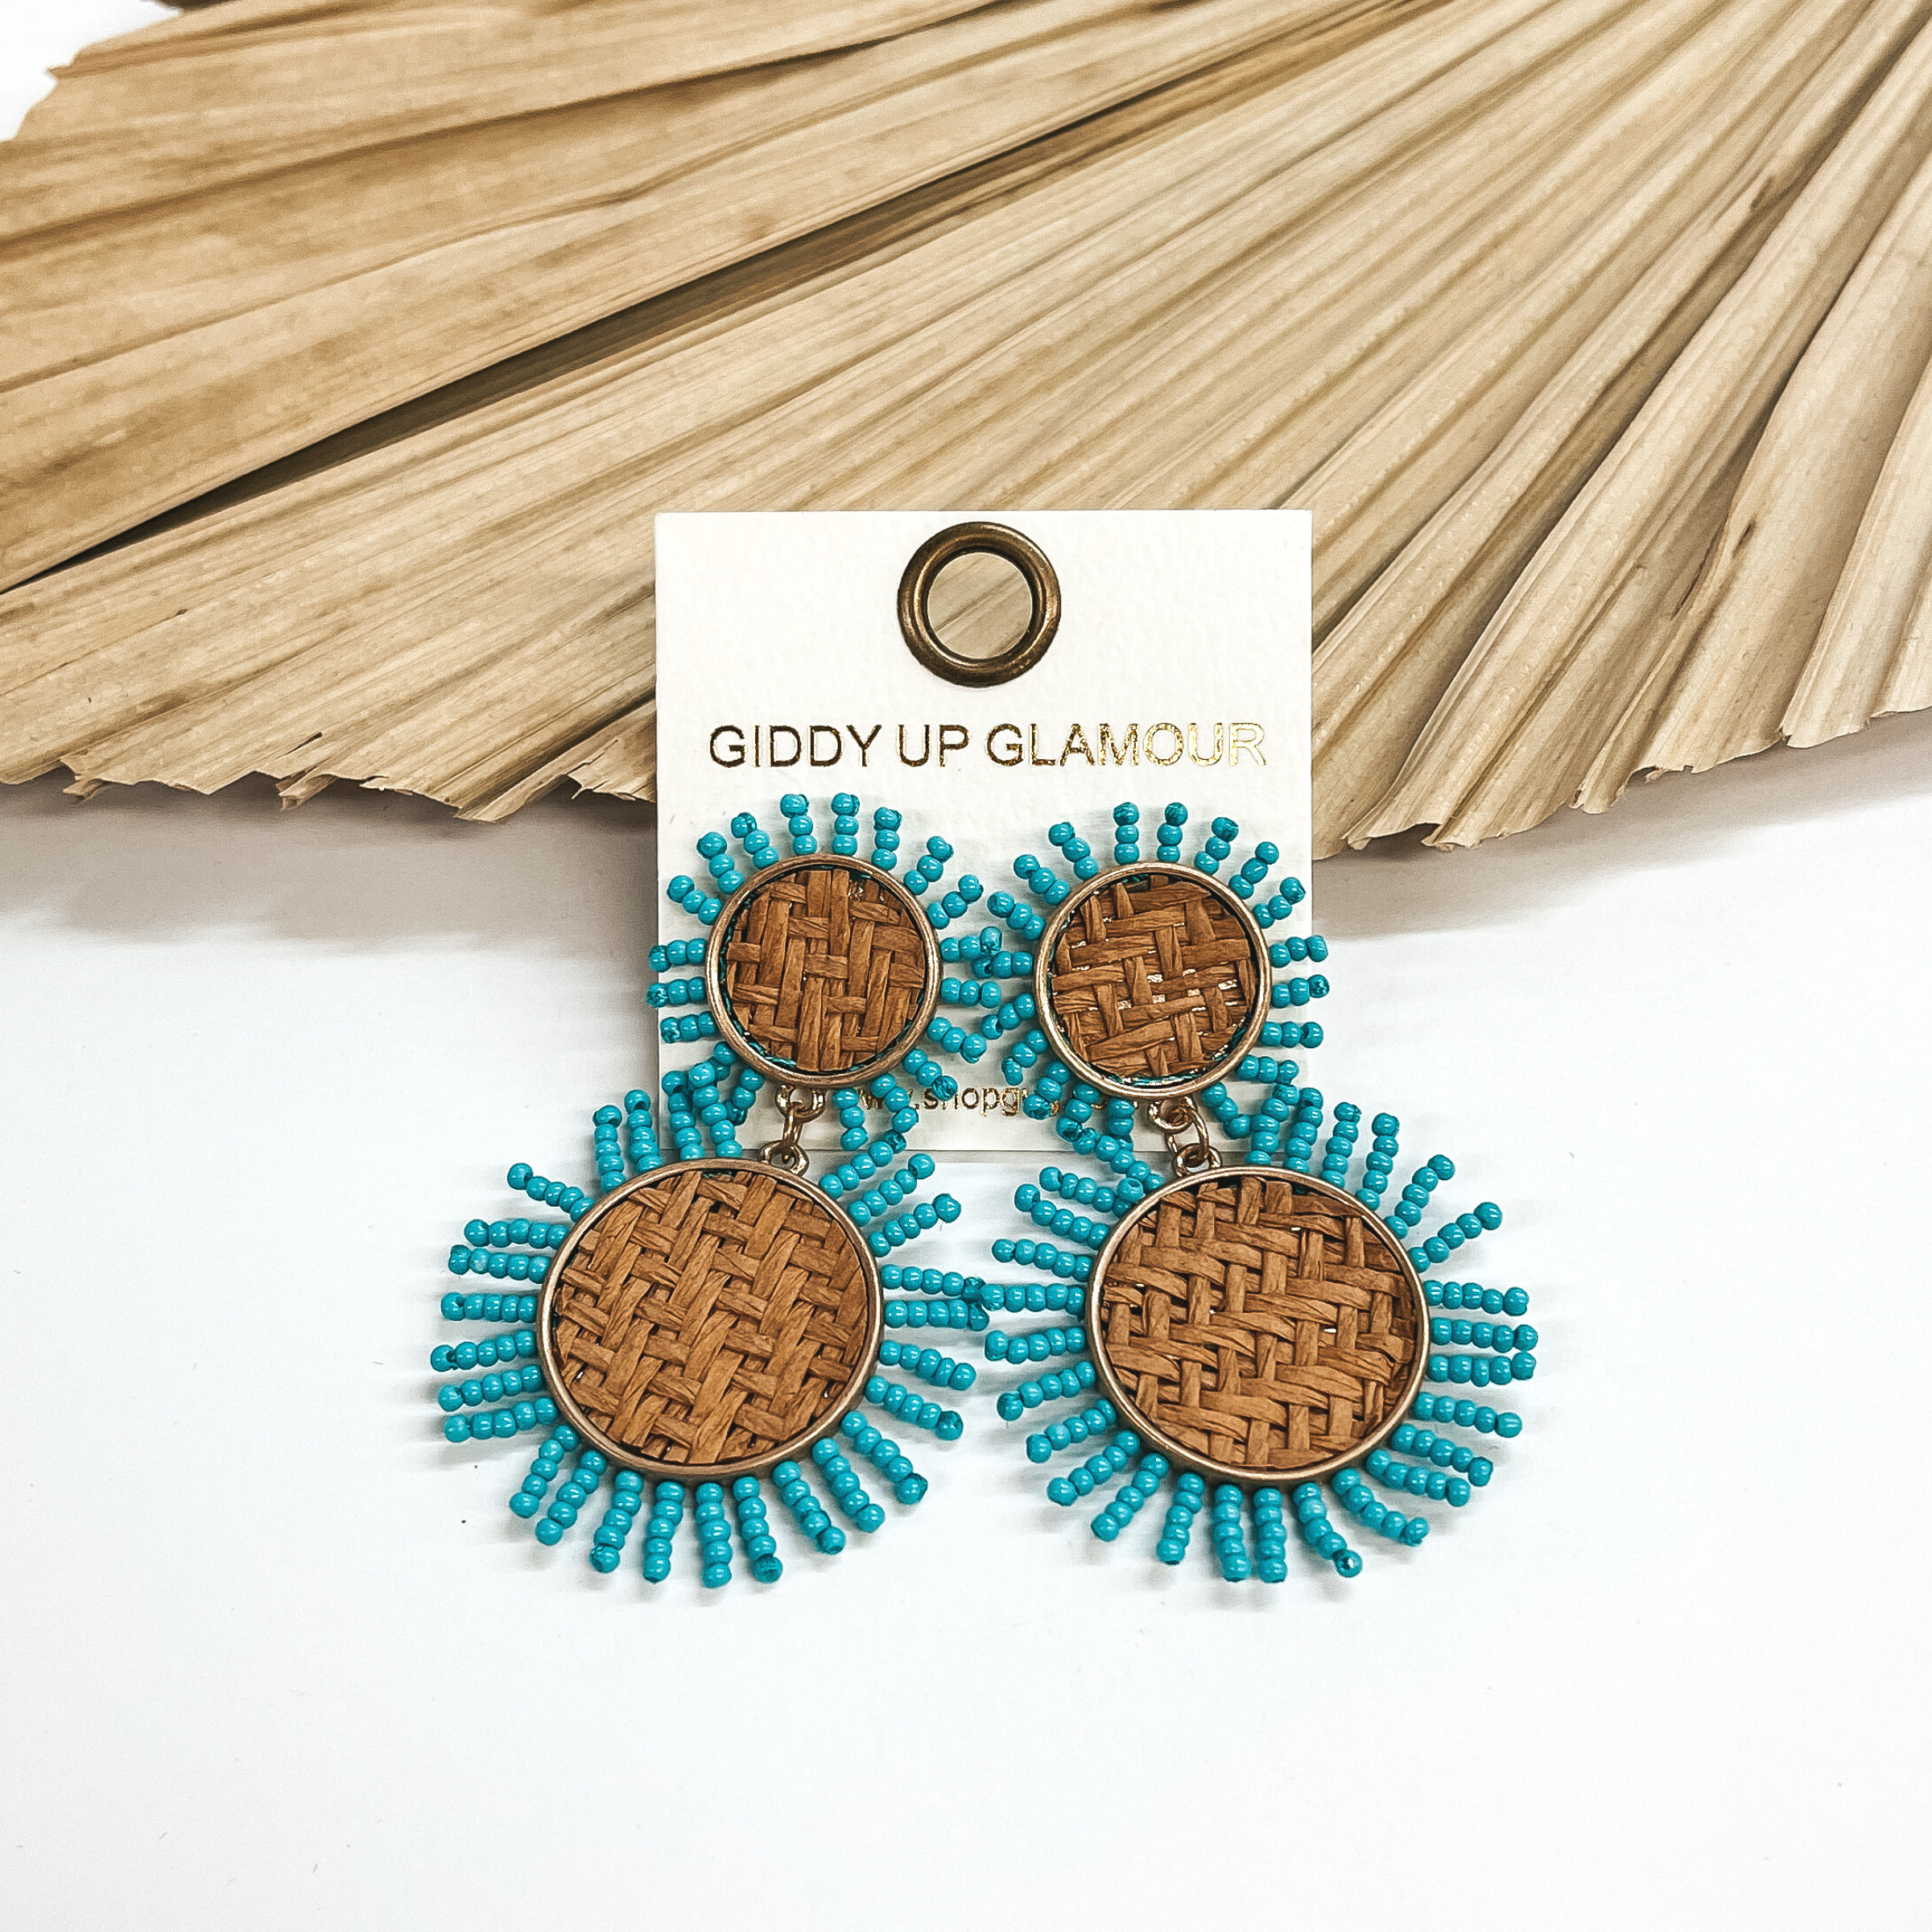 These earrings are two tiered woven earrings in a  gold setting with turquoise seed beads all around.  These earrings are taken on a white background and  leaned up against a dried up palm leaf.